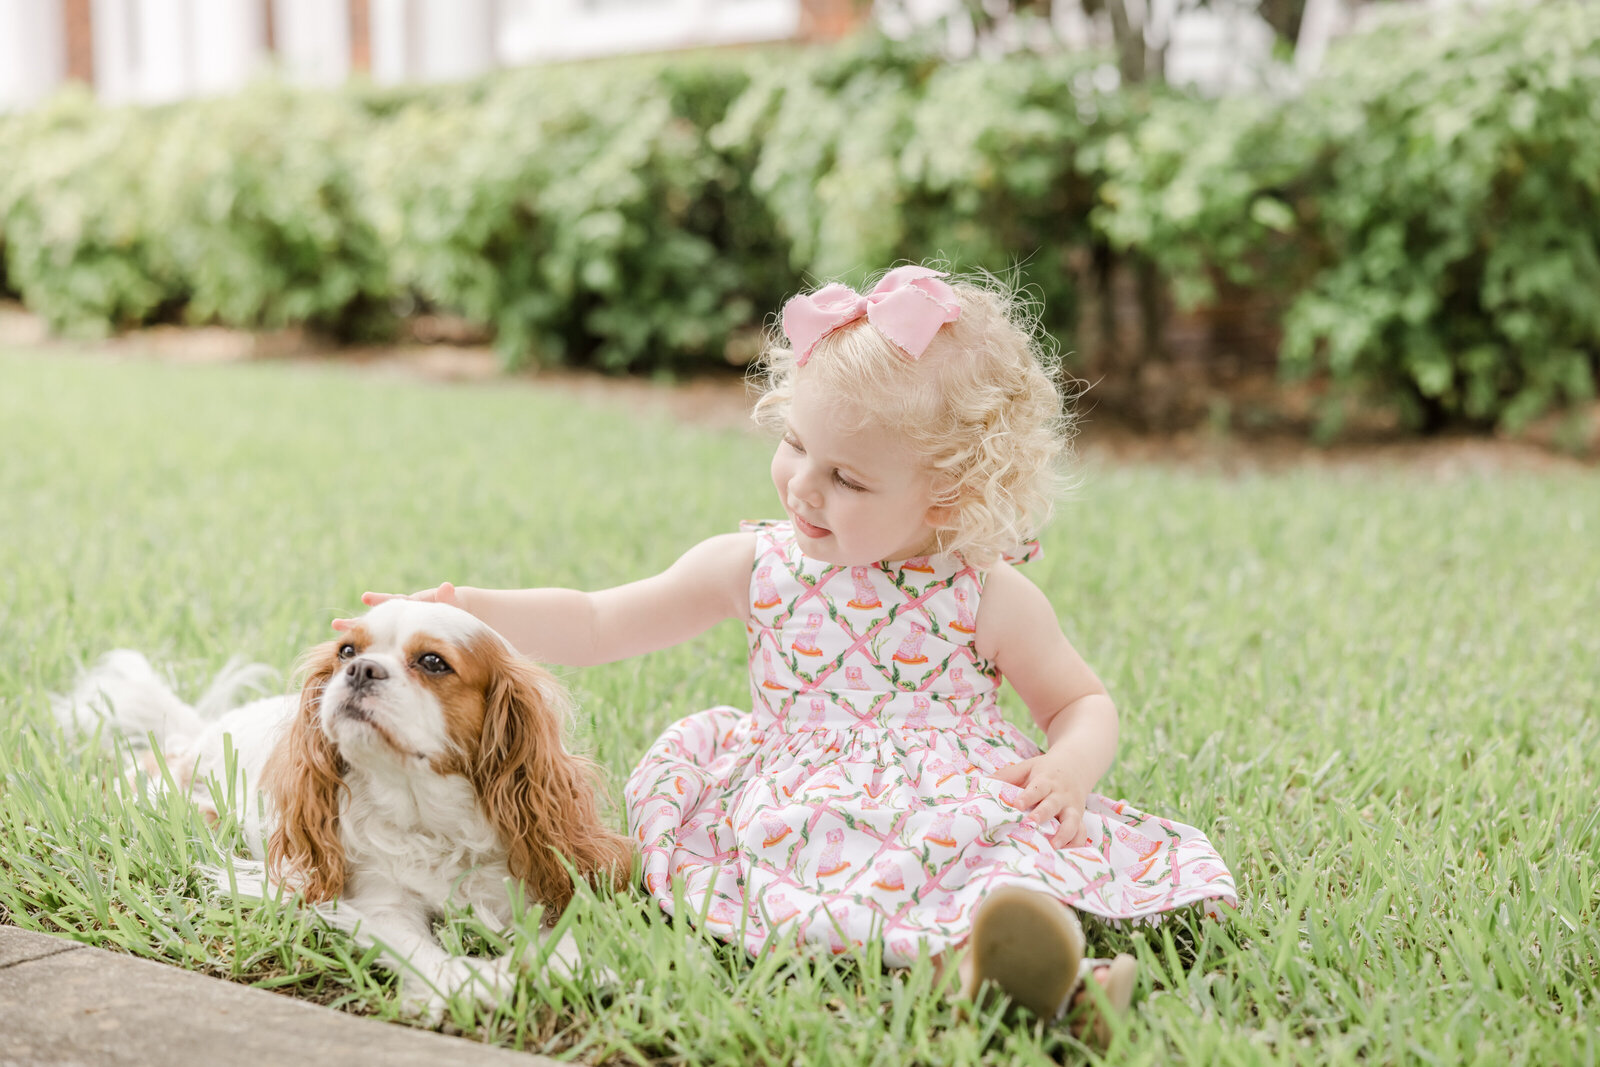 Toddler petting her King Charles Cavalier dog.